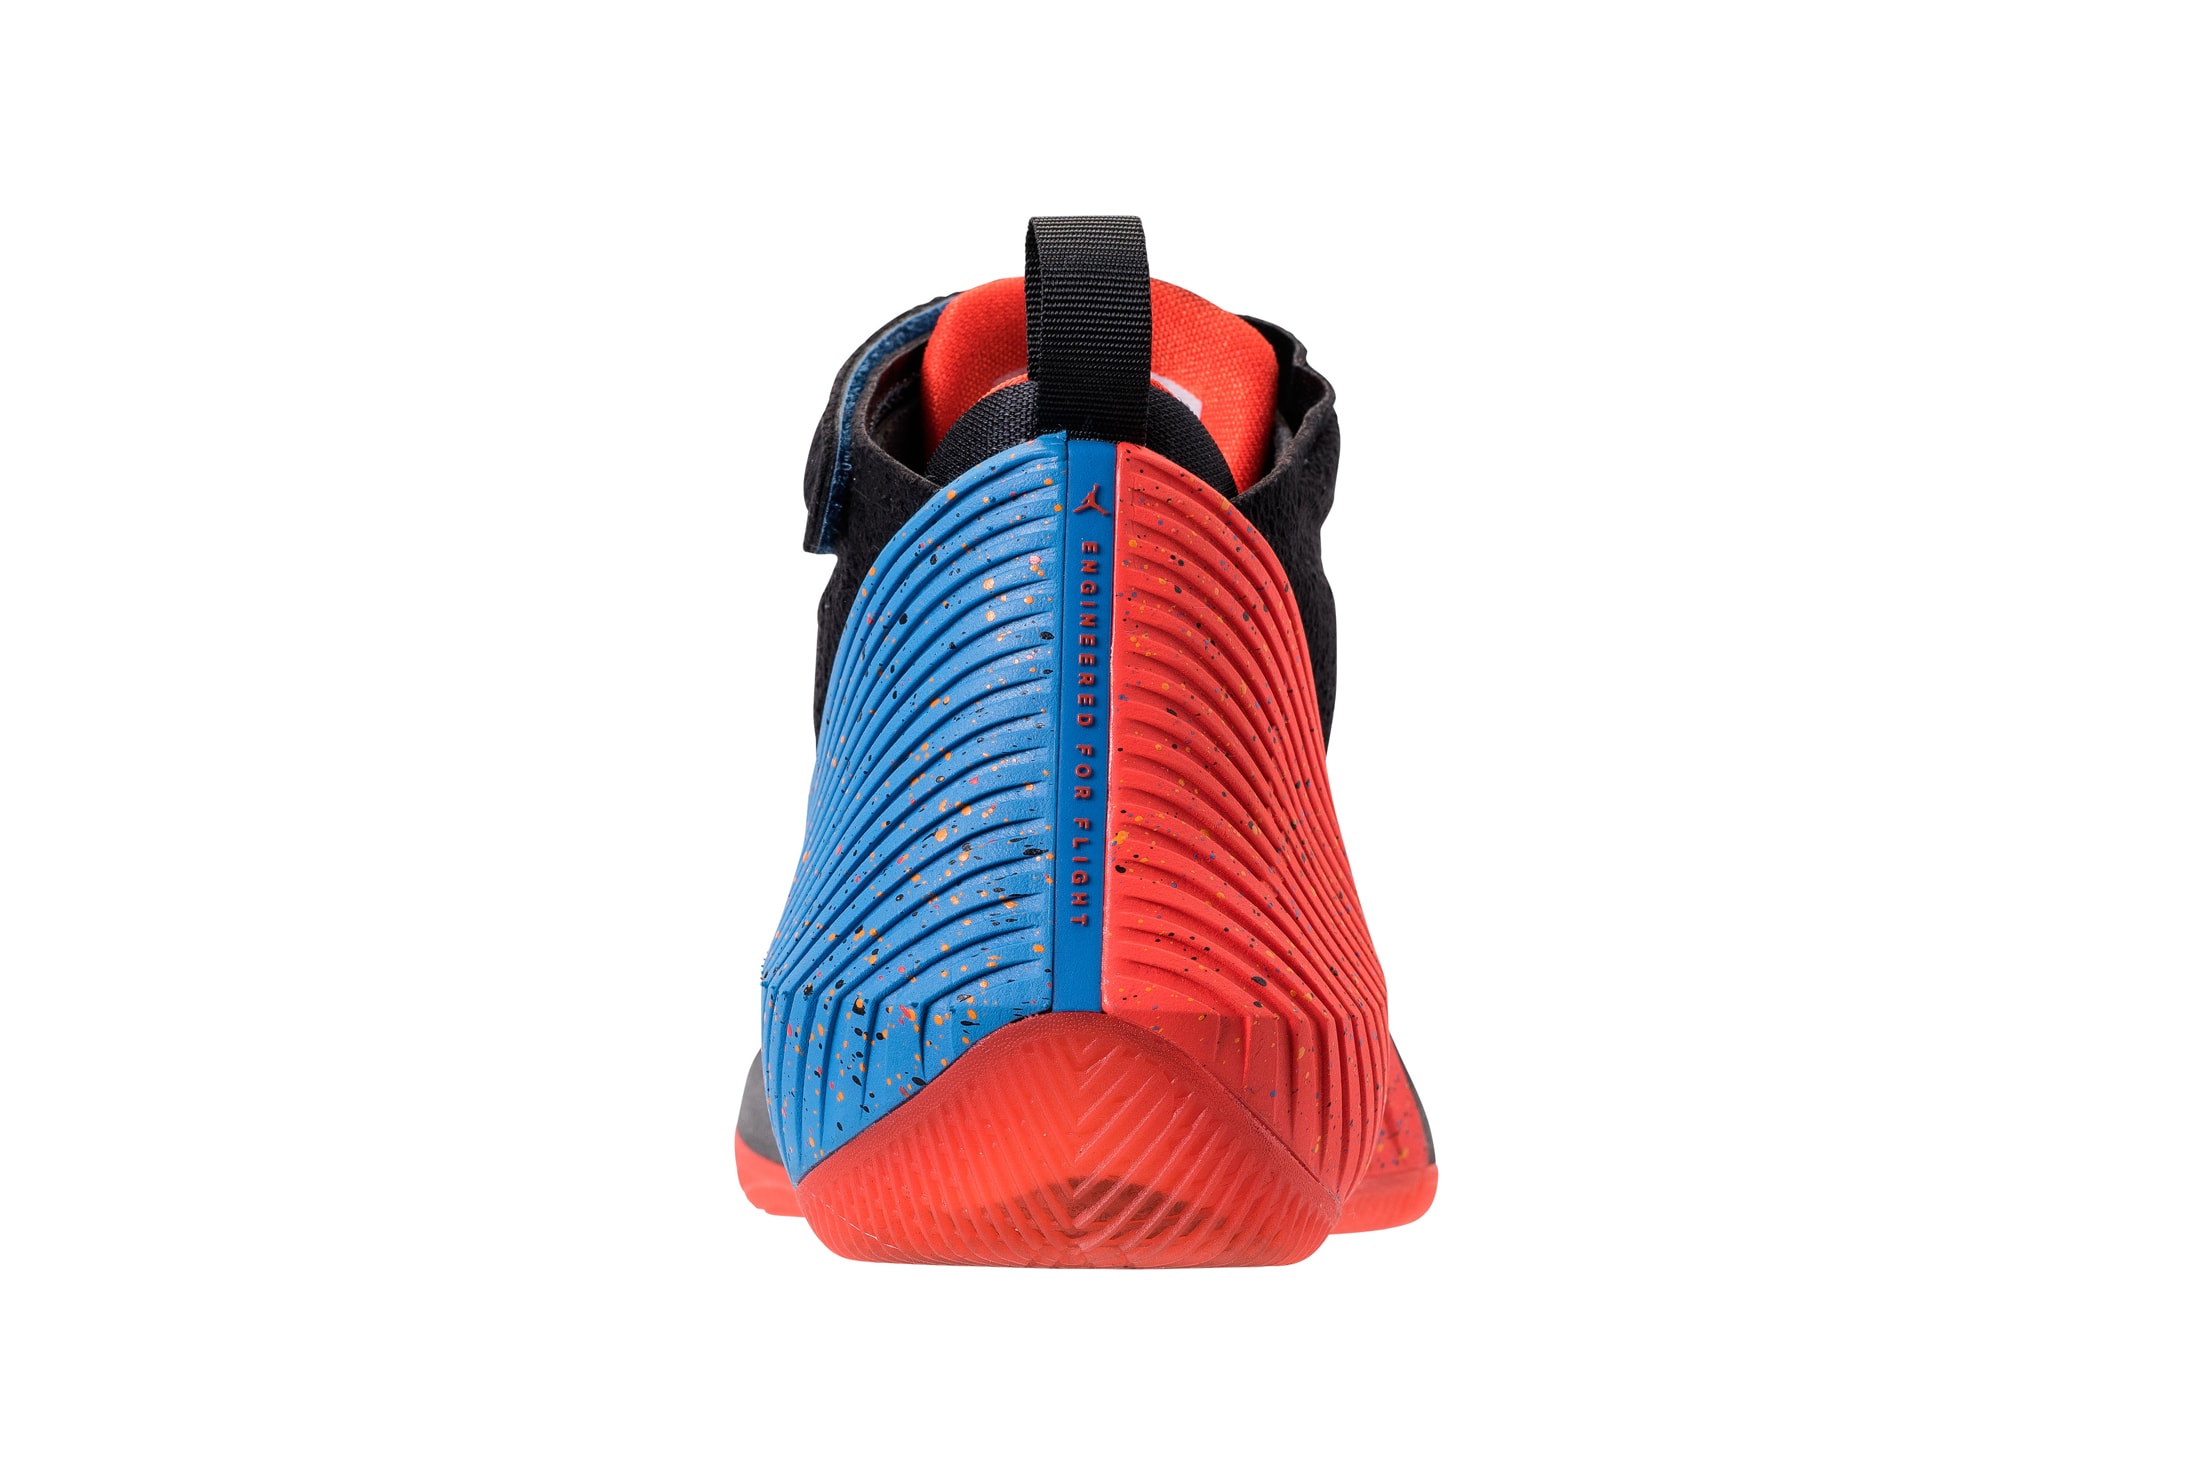 Jordan Brand Why Not Zer0.1 Release Russell Westbrook Basketball red black blue Triple Double King